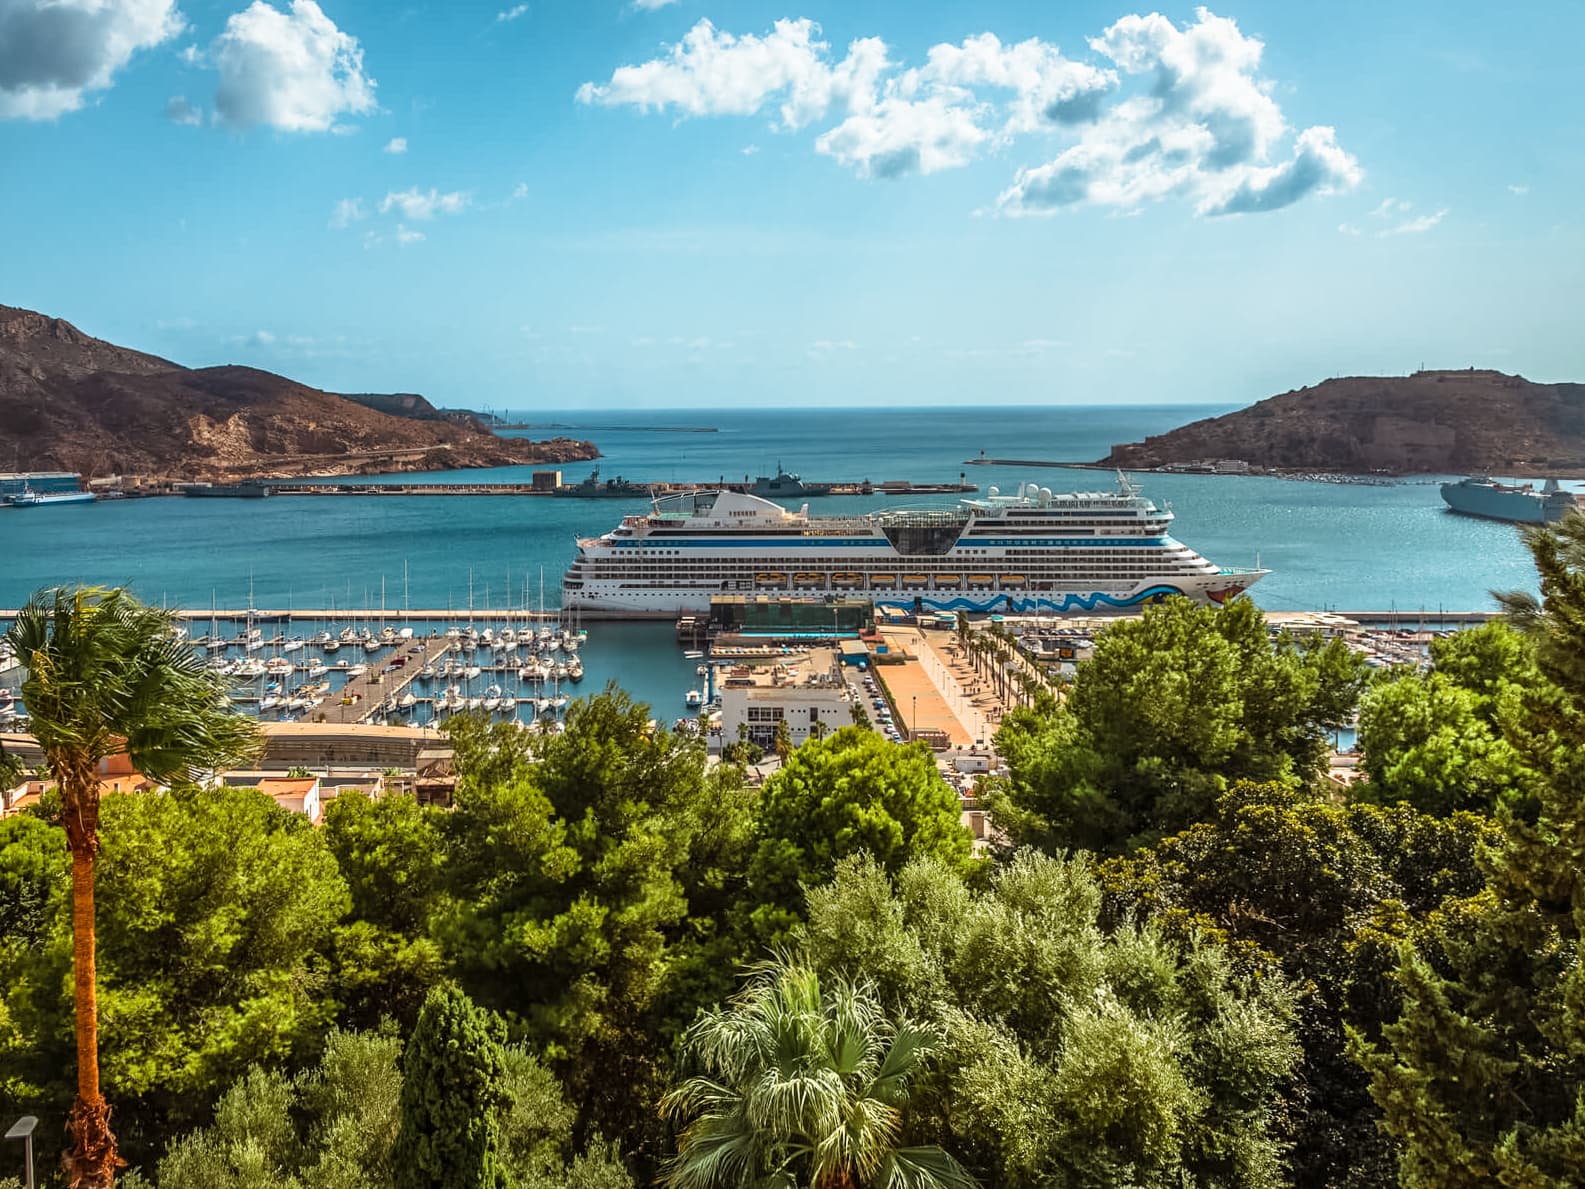 An overview of the central cruise port in Cartagena, Spain